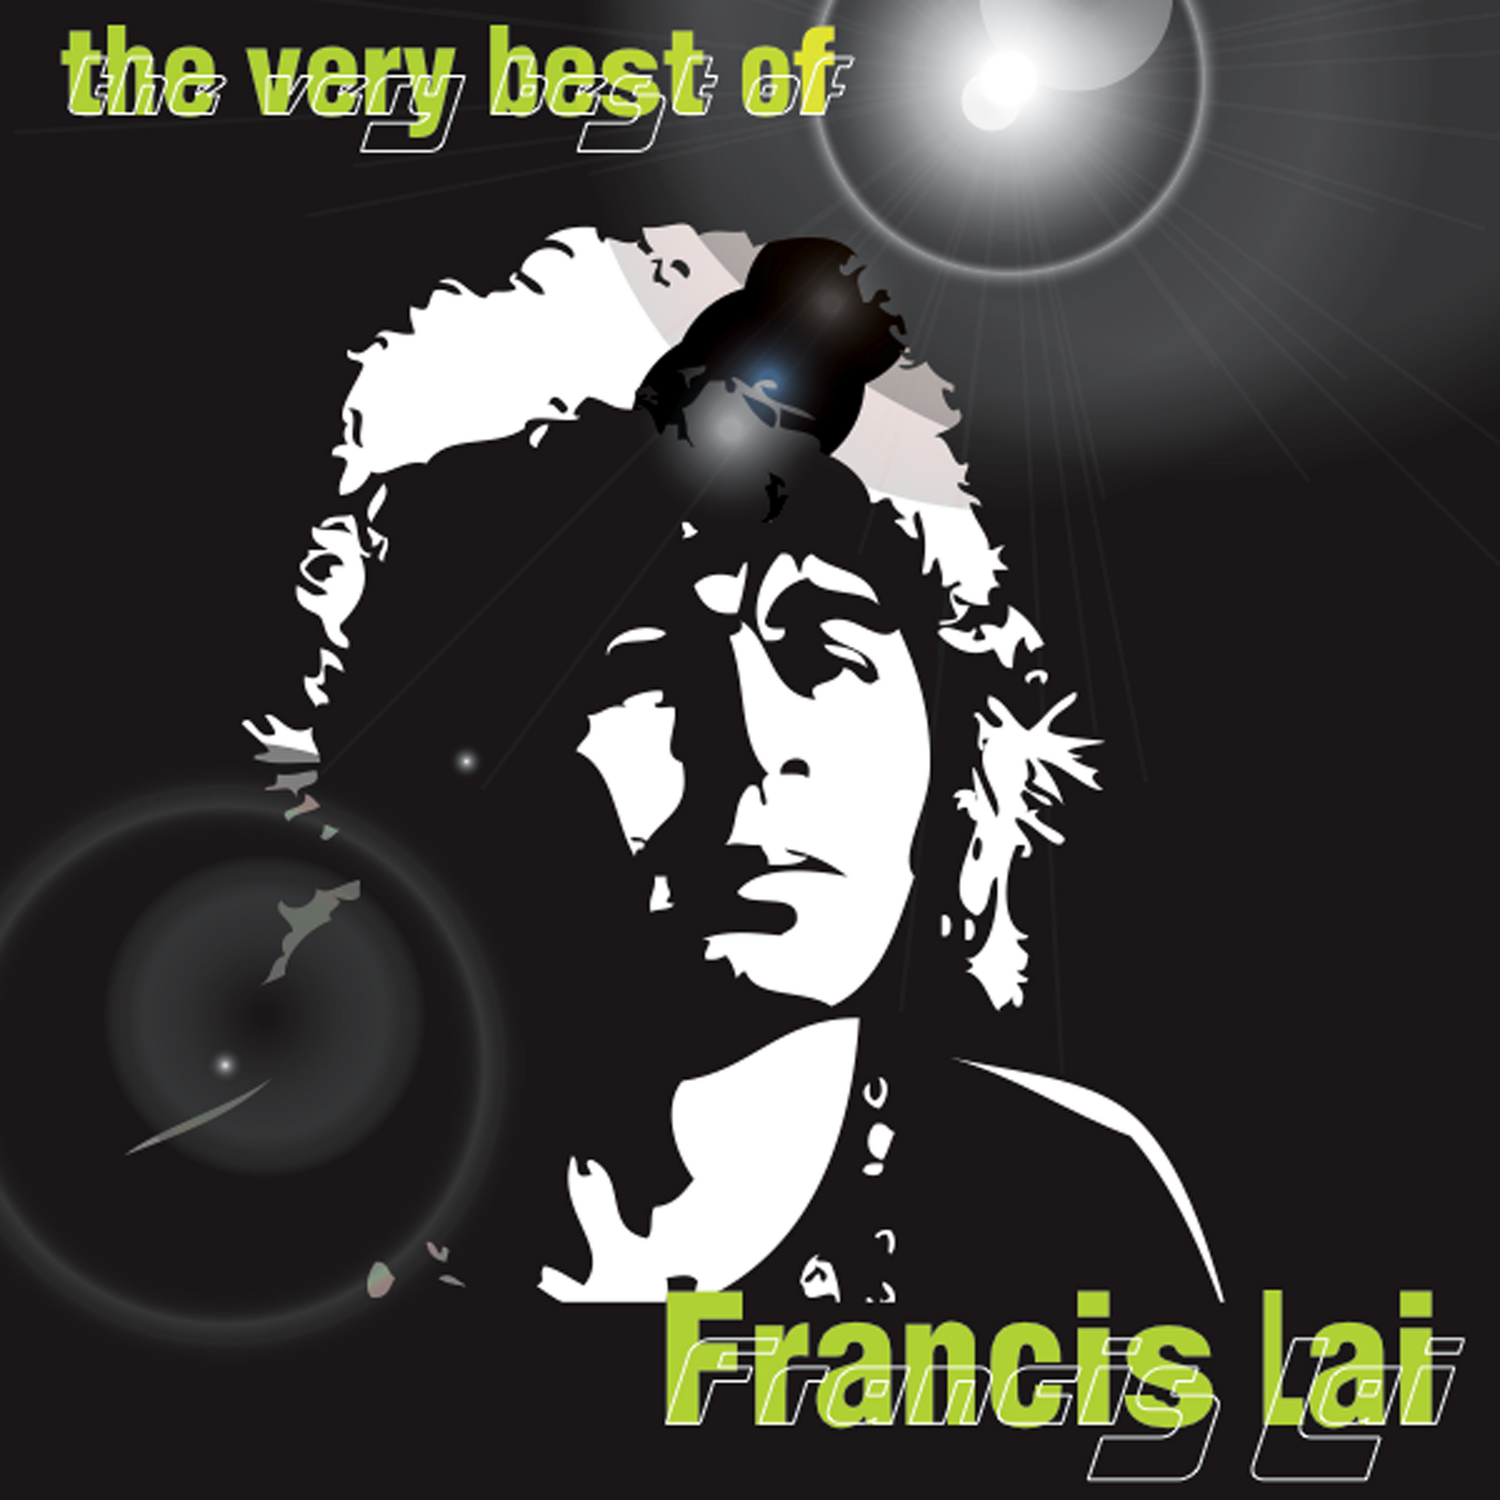 The Very Best Of Francis Lai